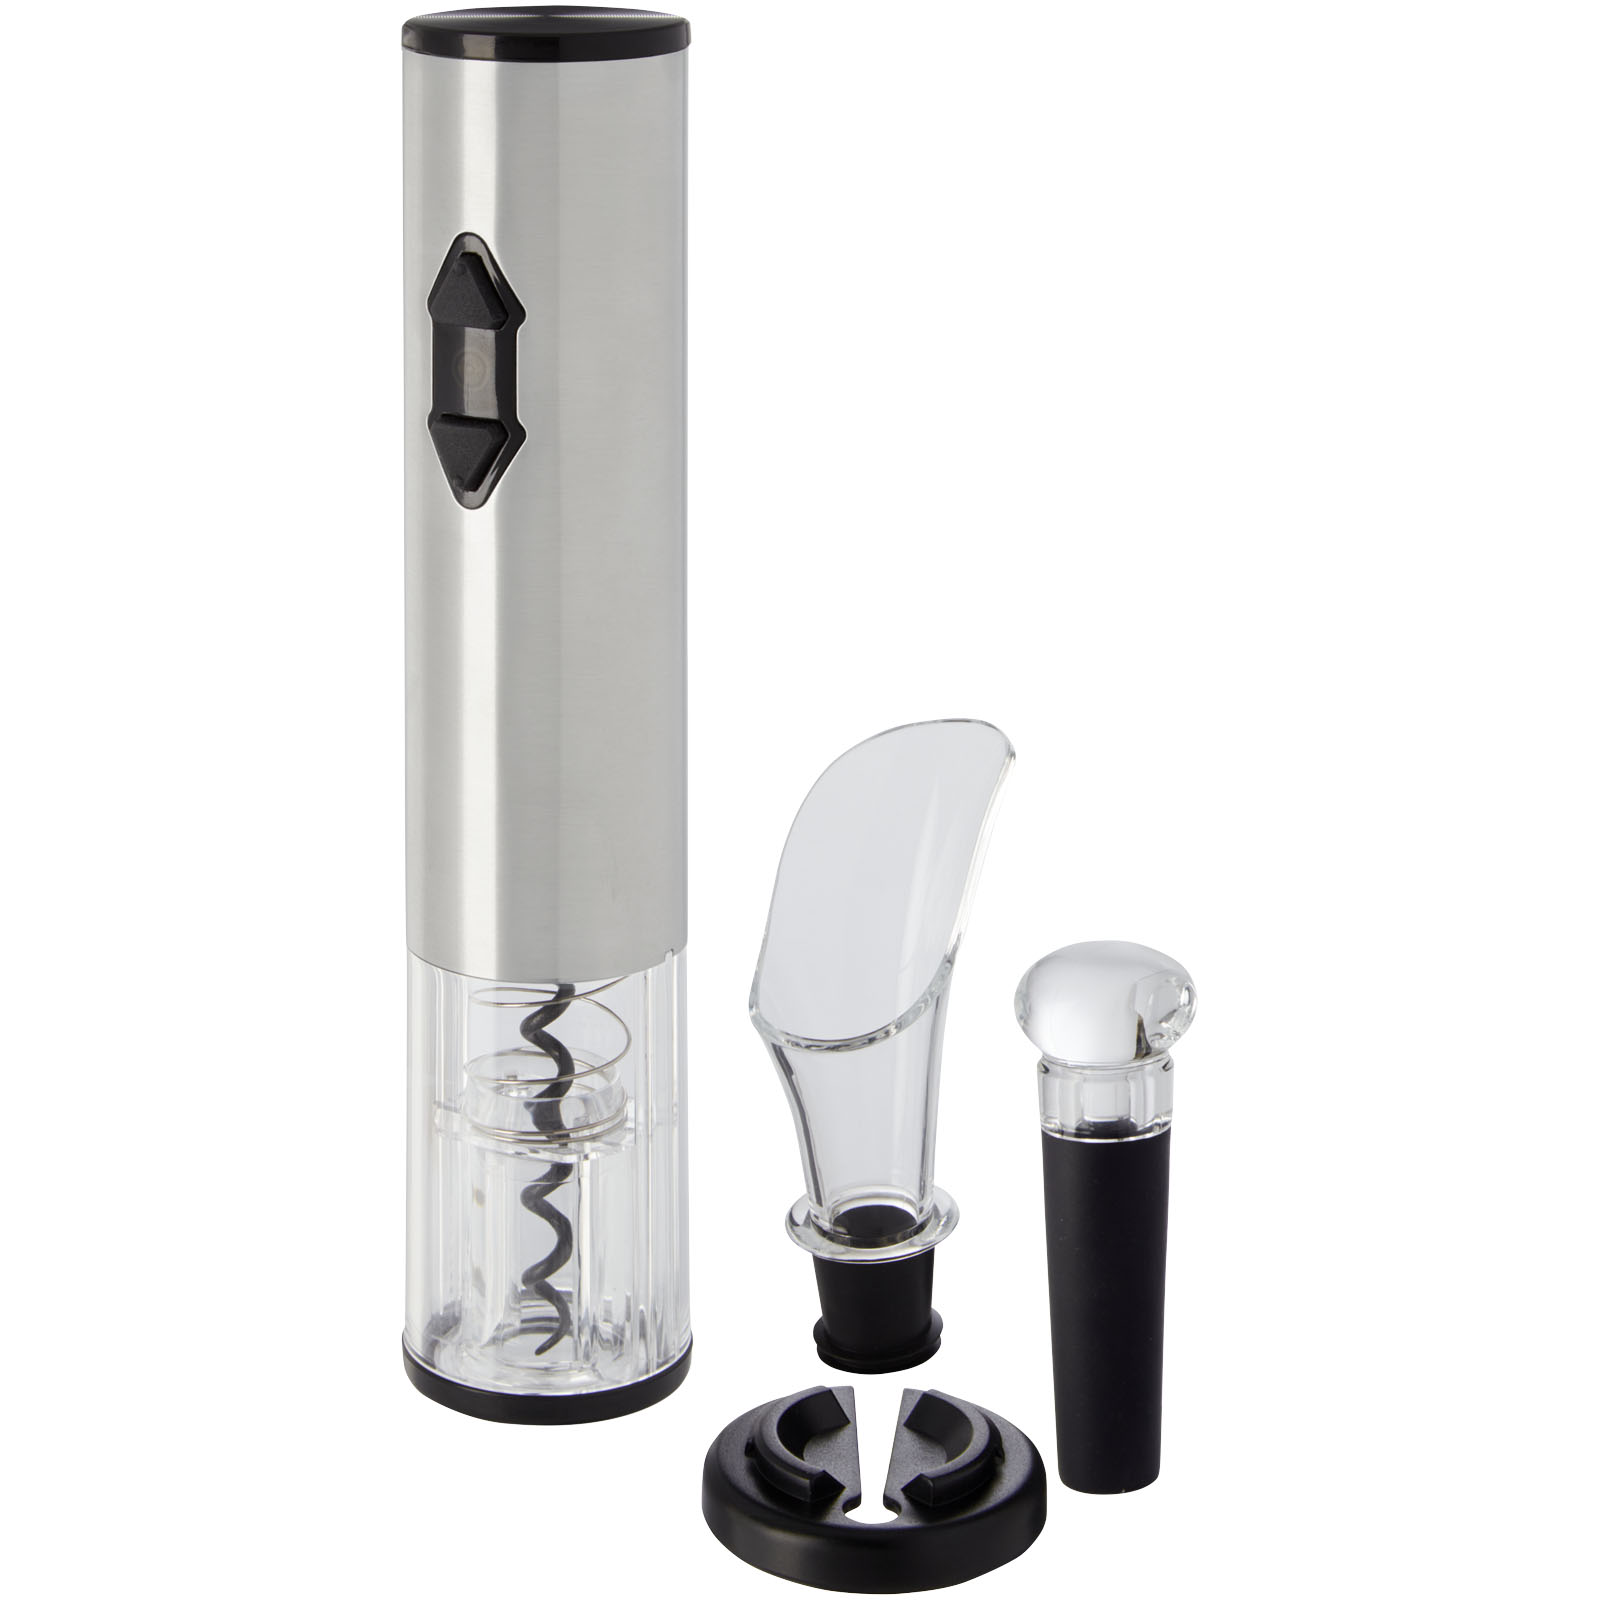 Wine Accessories - Pino electric wine opener with wine tools